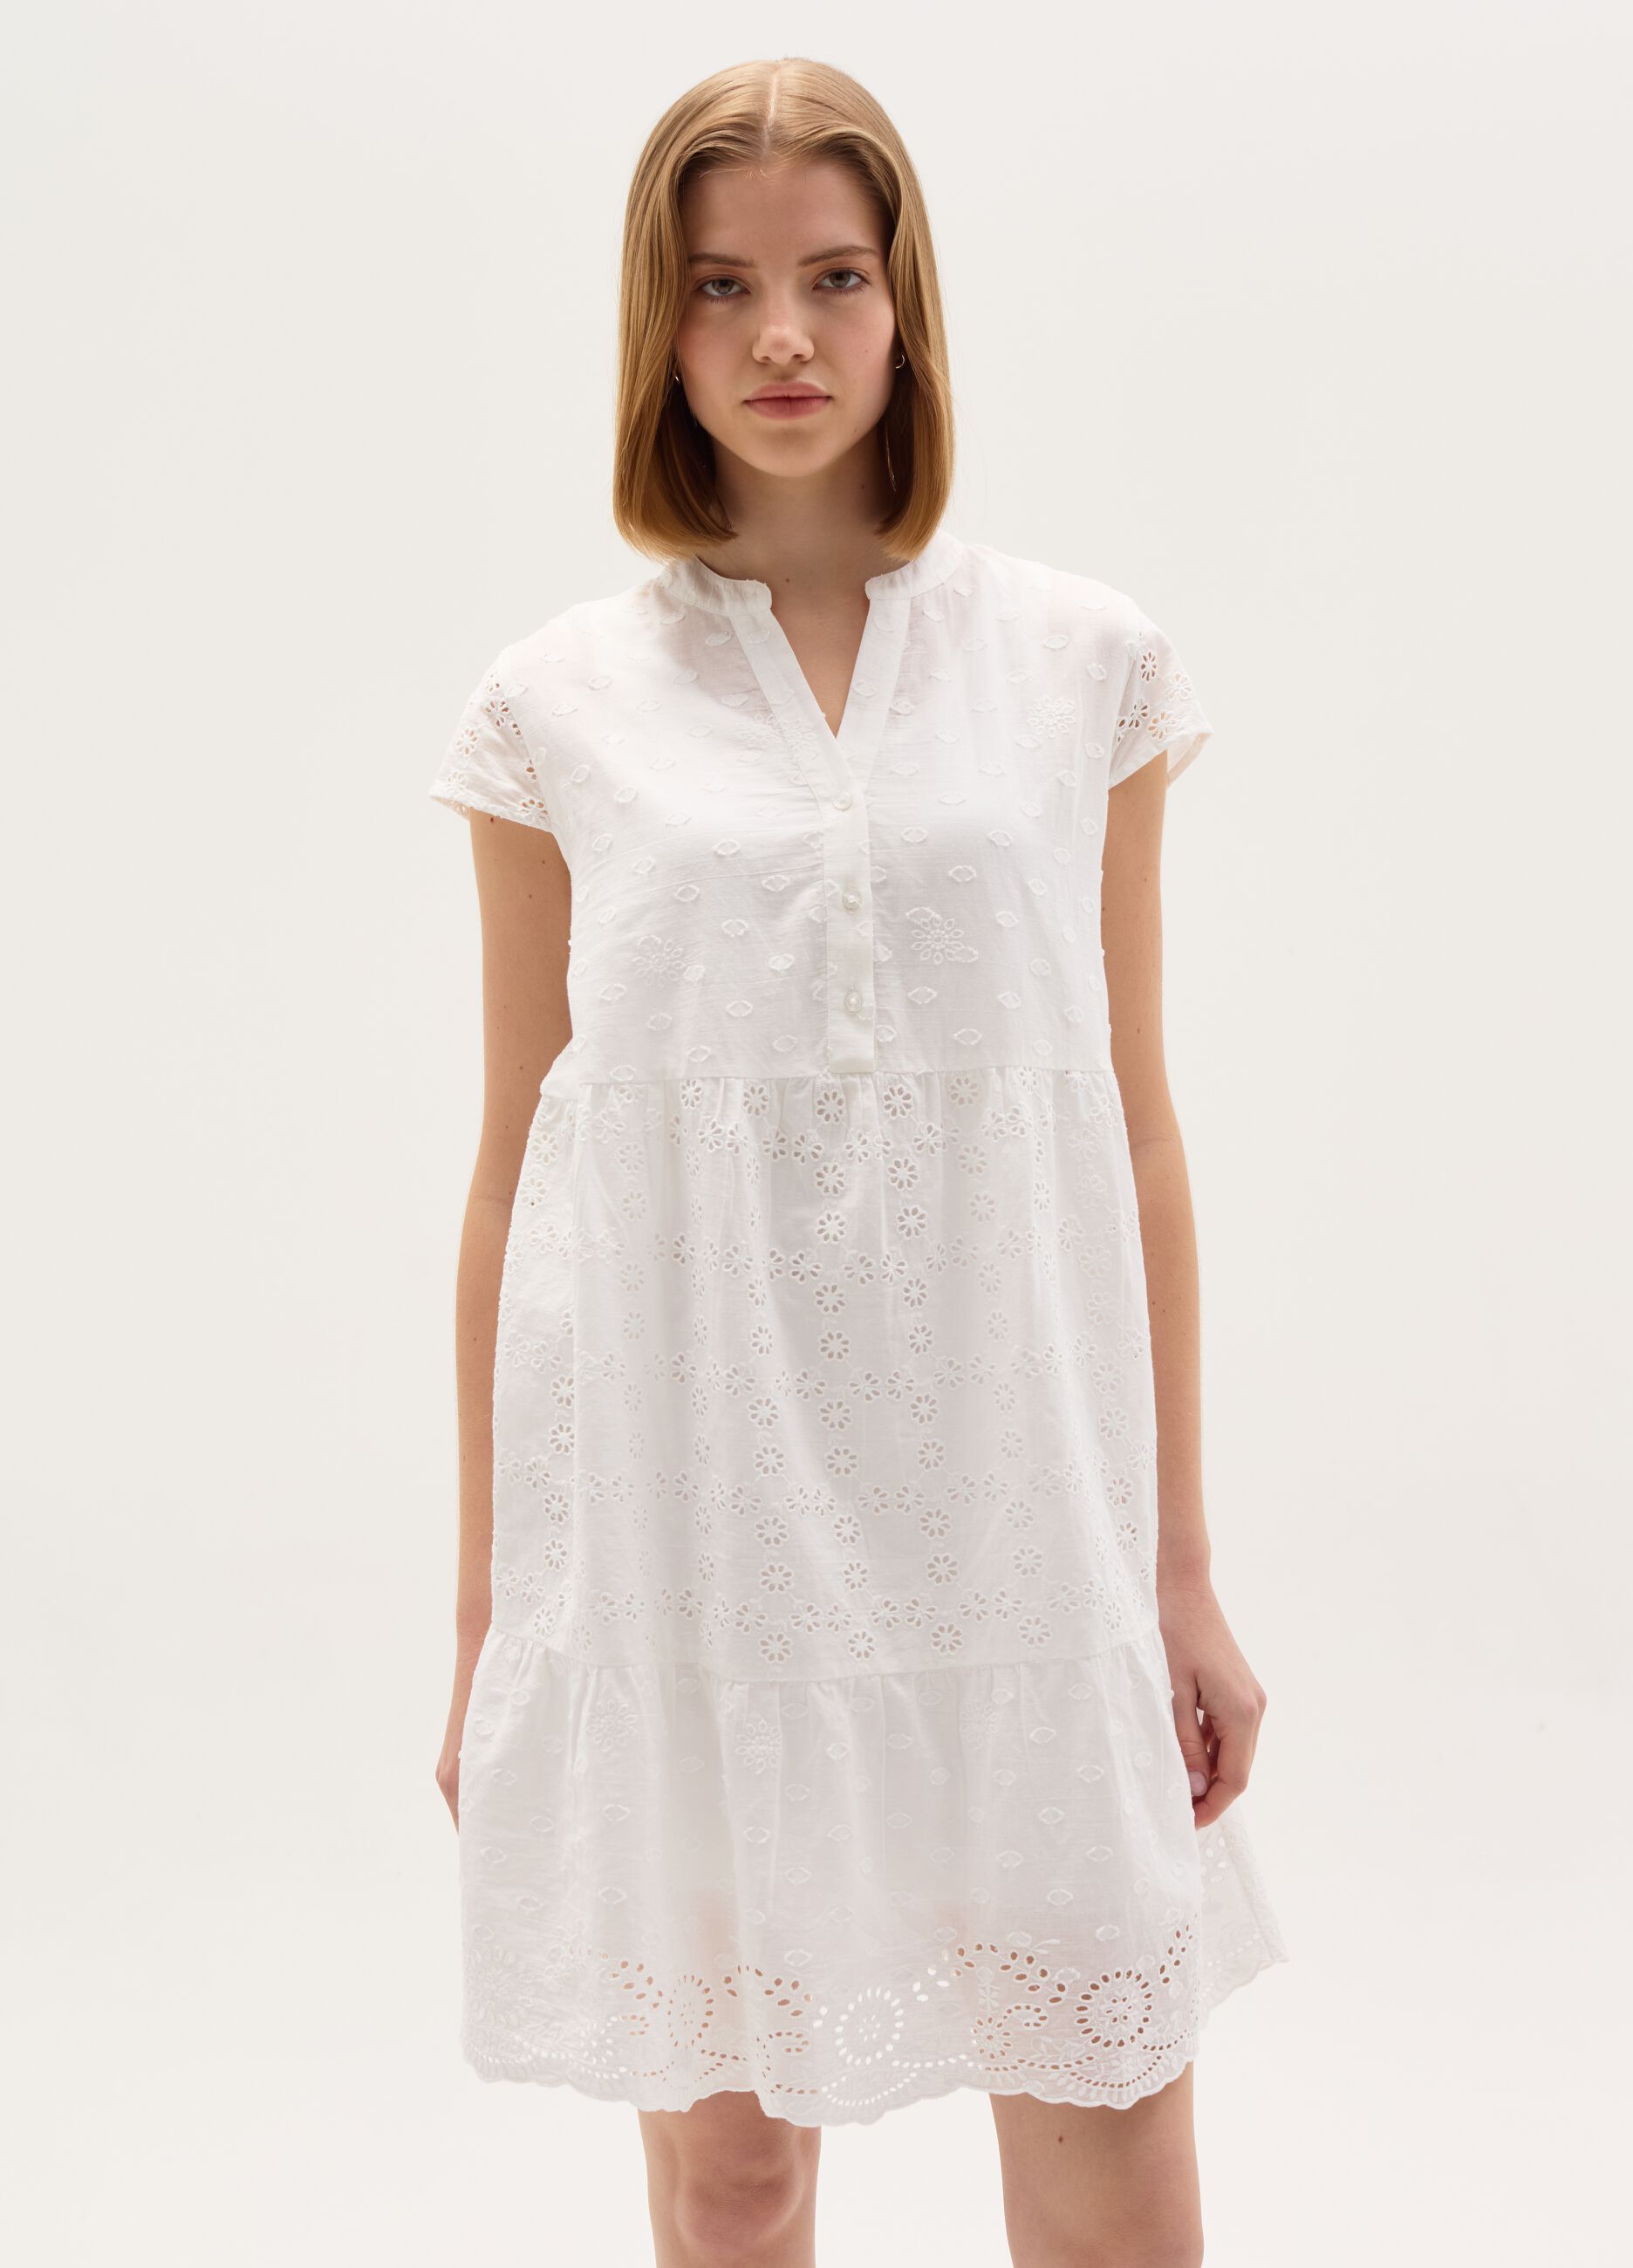 Maternity dress in cotton dobby and broderie anglaise